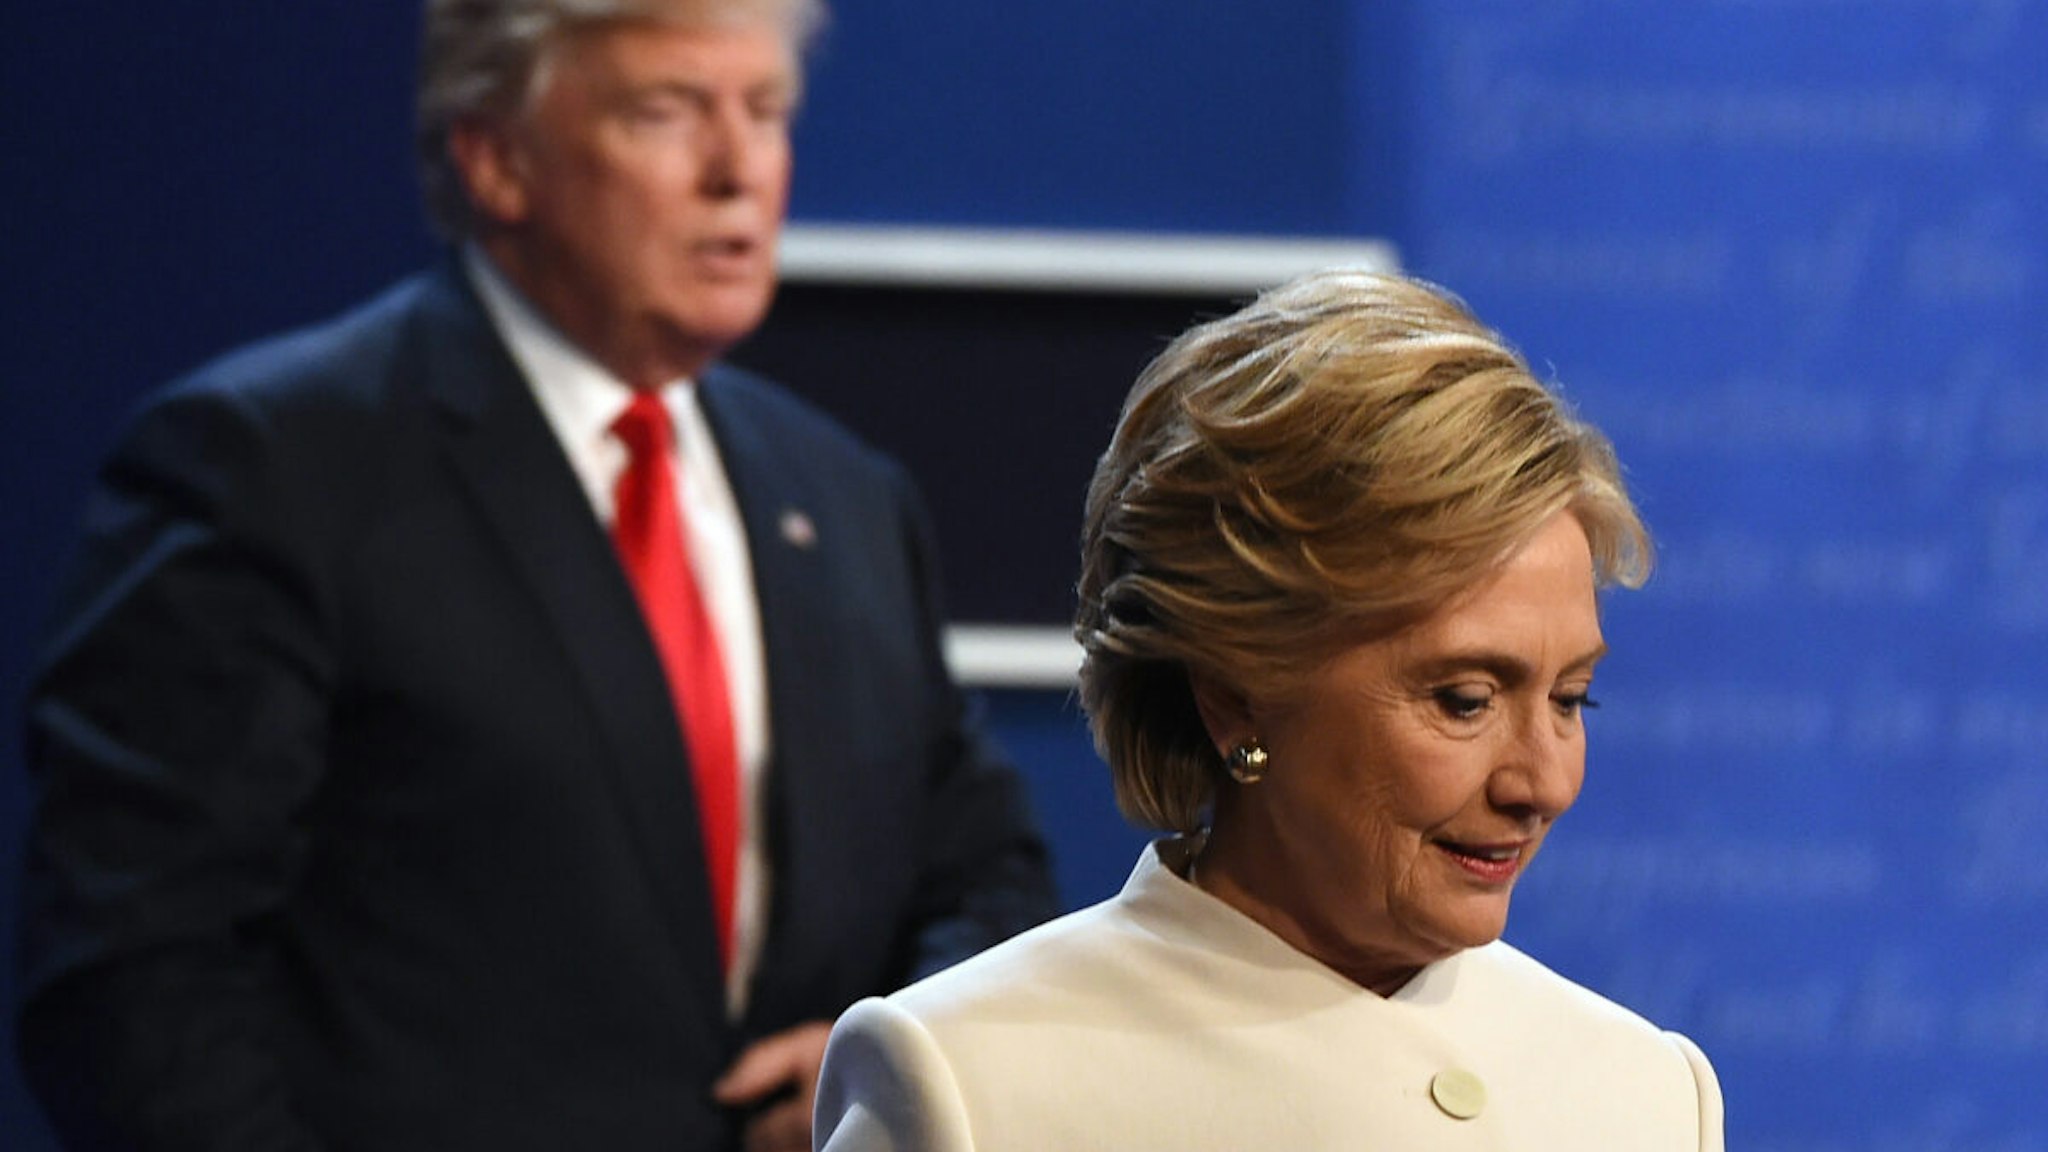 Democratic nominee Hillary Clinton (R) and Republican nominee Donald Trump walk off the stage after the final presidential debate at the Thomas & Mack Center on the campus of the University of Las Vegas in Las Vegas, Nevada on October 19, 2016.